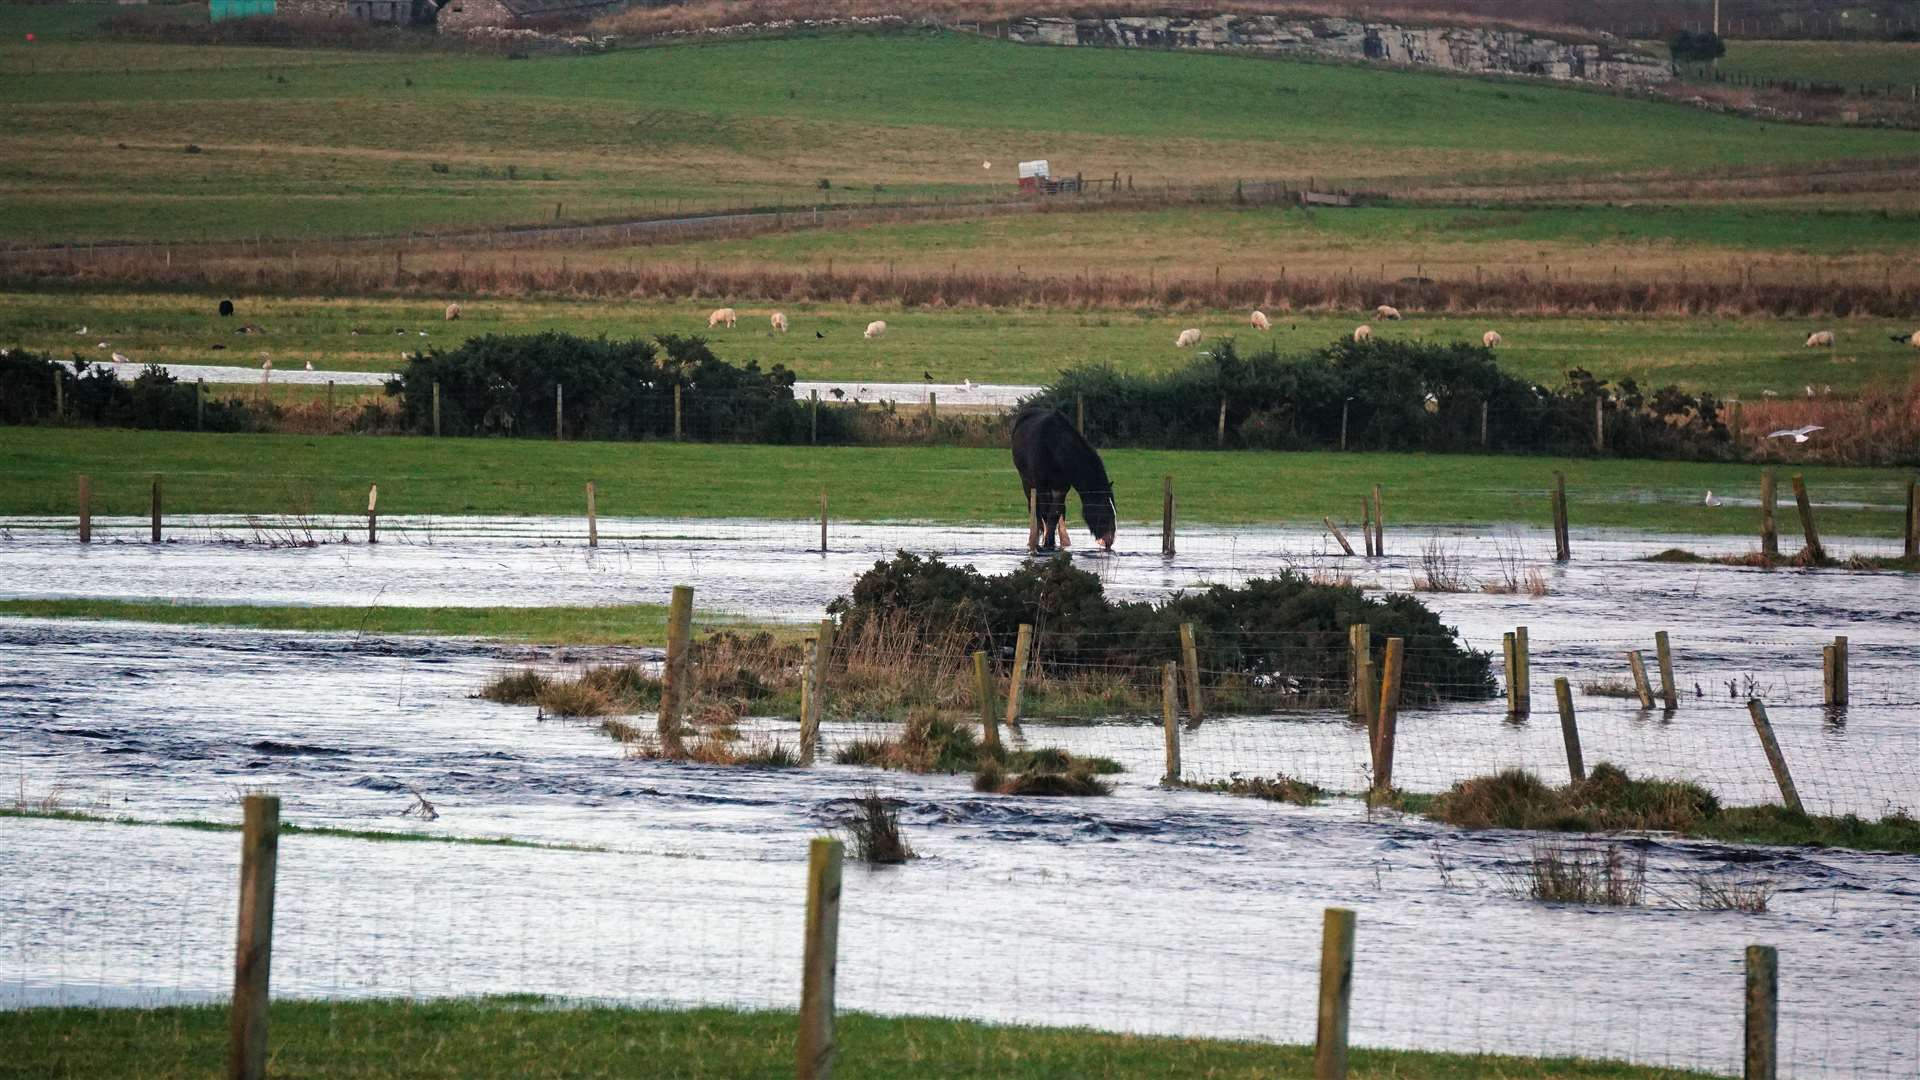 Achairn Burn burst its banks and a horse takes a drink. Picture: DGS